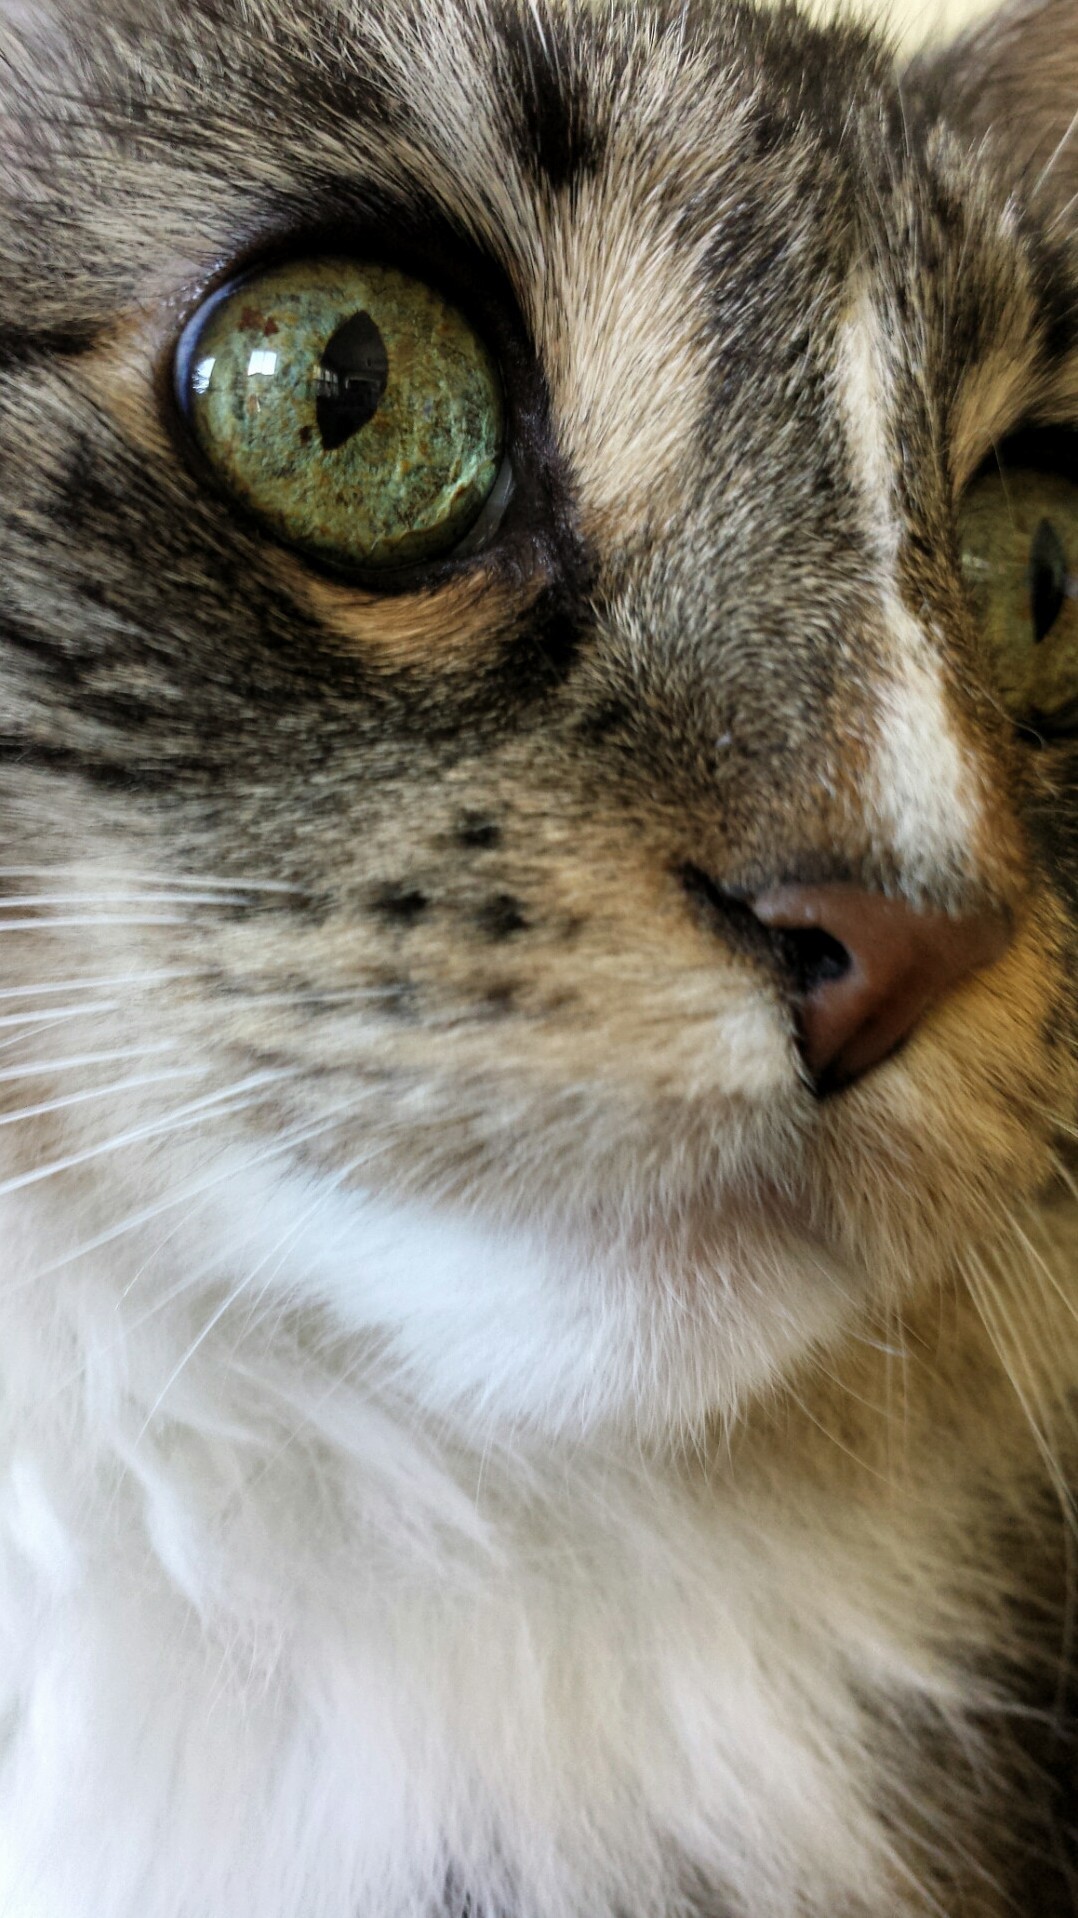 Green eyes and white nose stripe. lucille is a pretty kitty.